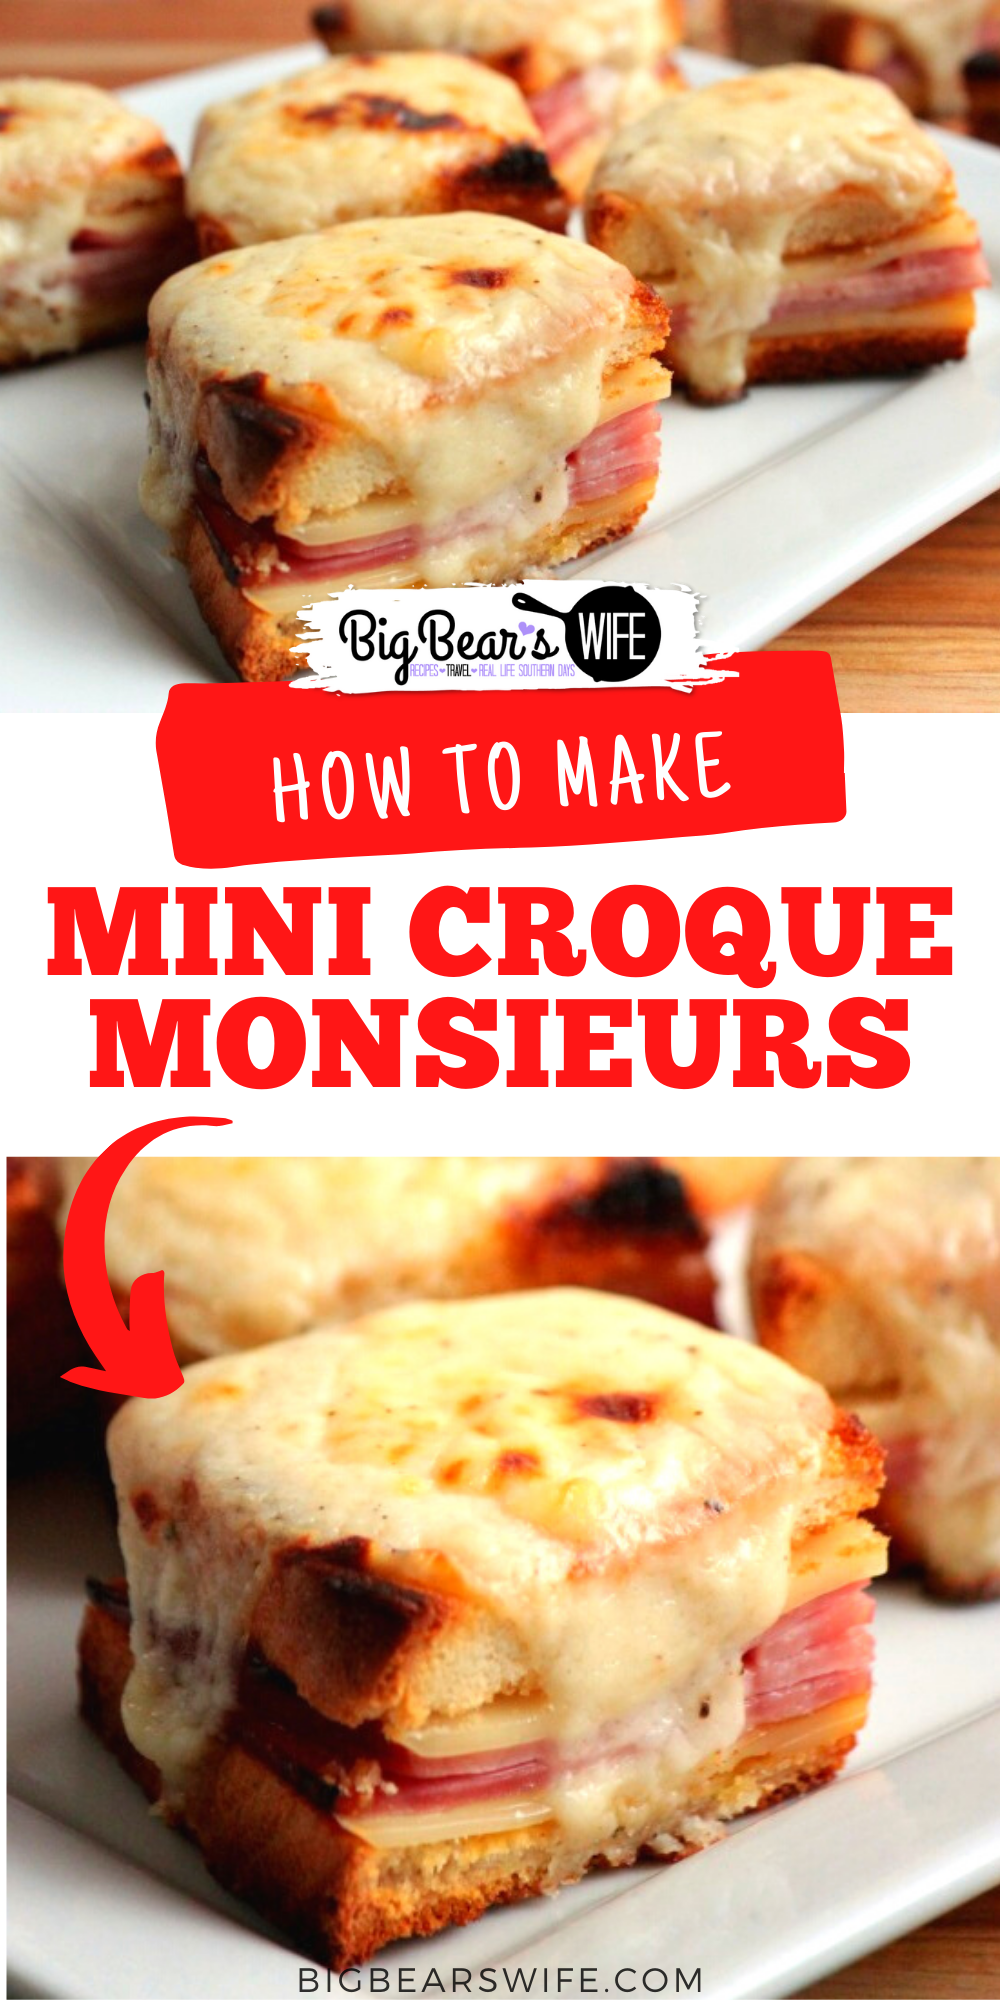  Mini Croque Monsieurs might sounds fancy but they're really just perfectly baked ham and cheese sandwiches with a simple cheesy Bechamel Sauce on top! via @bigbearswife